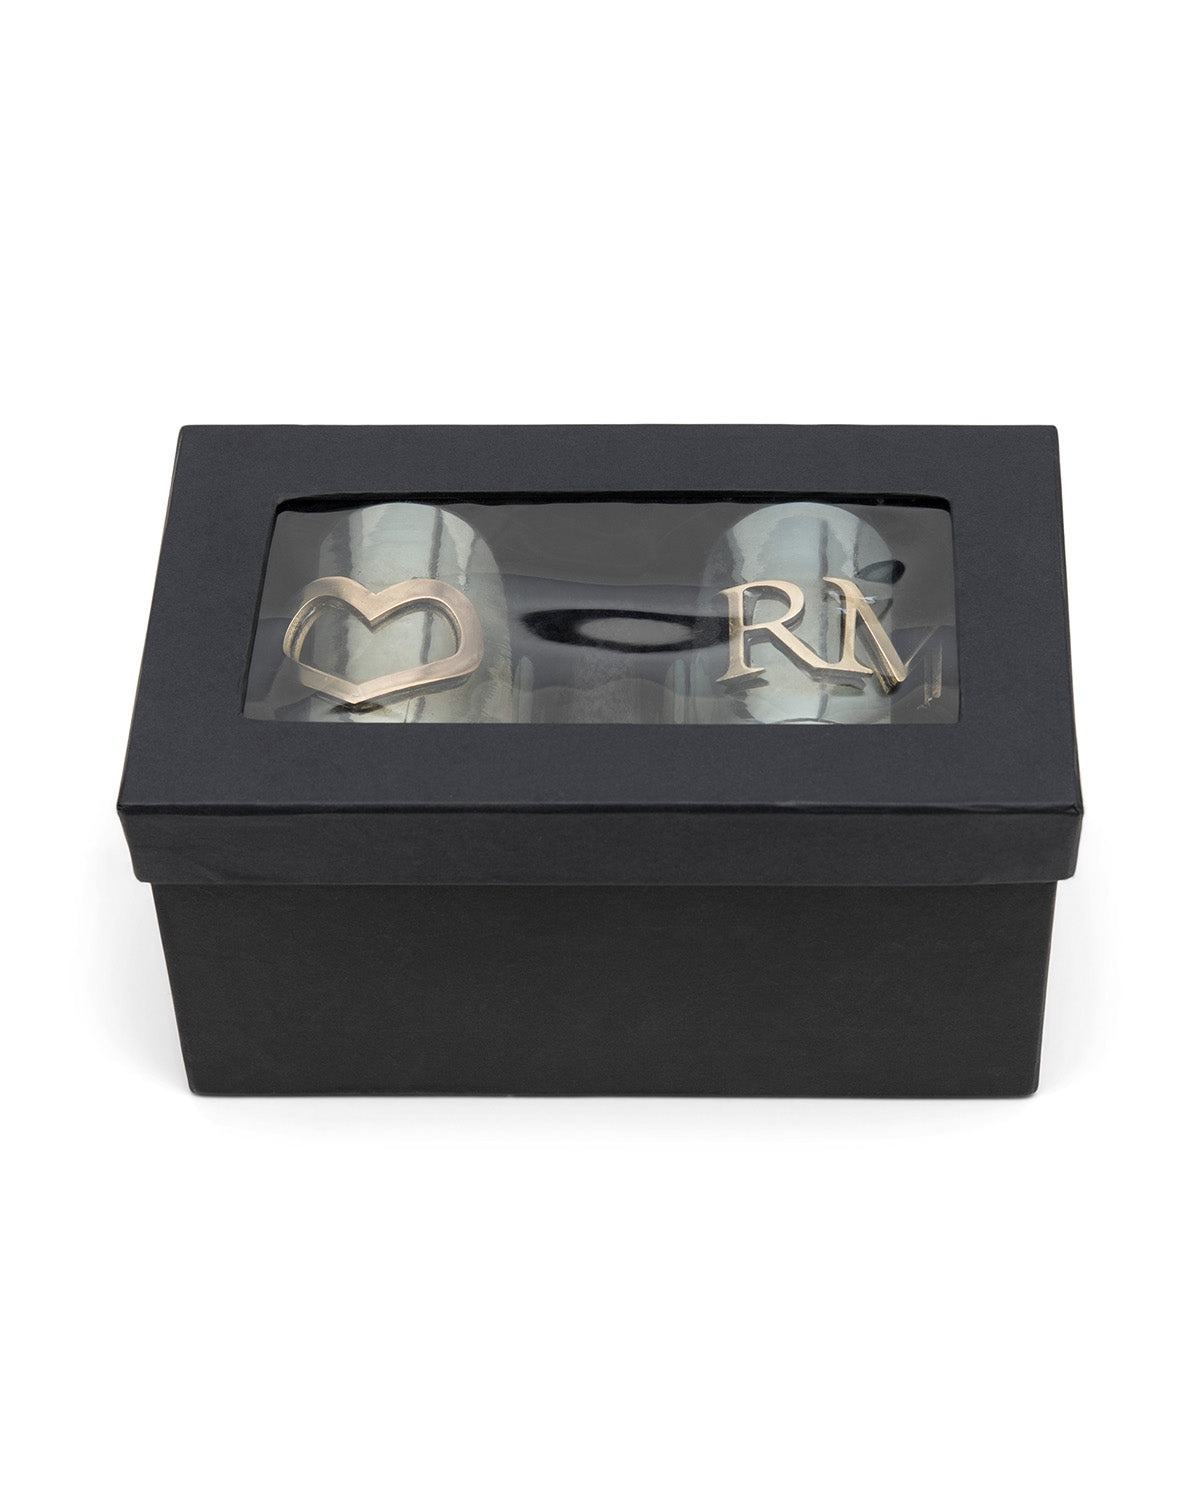 Two PIECES Gold-coloured  lanterns in a black gift box by Riviera Maison